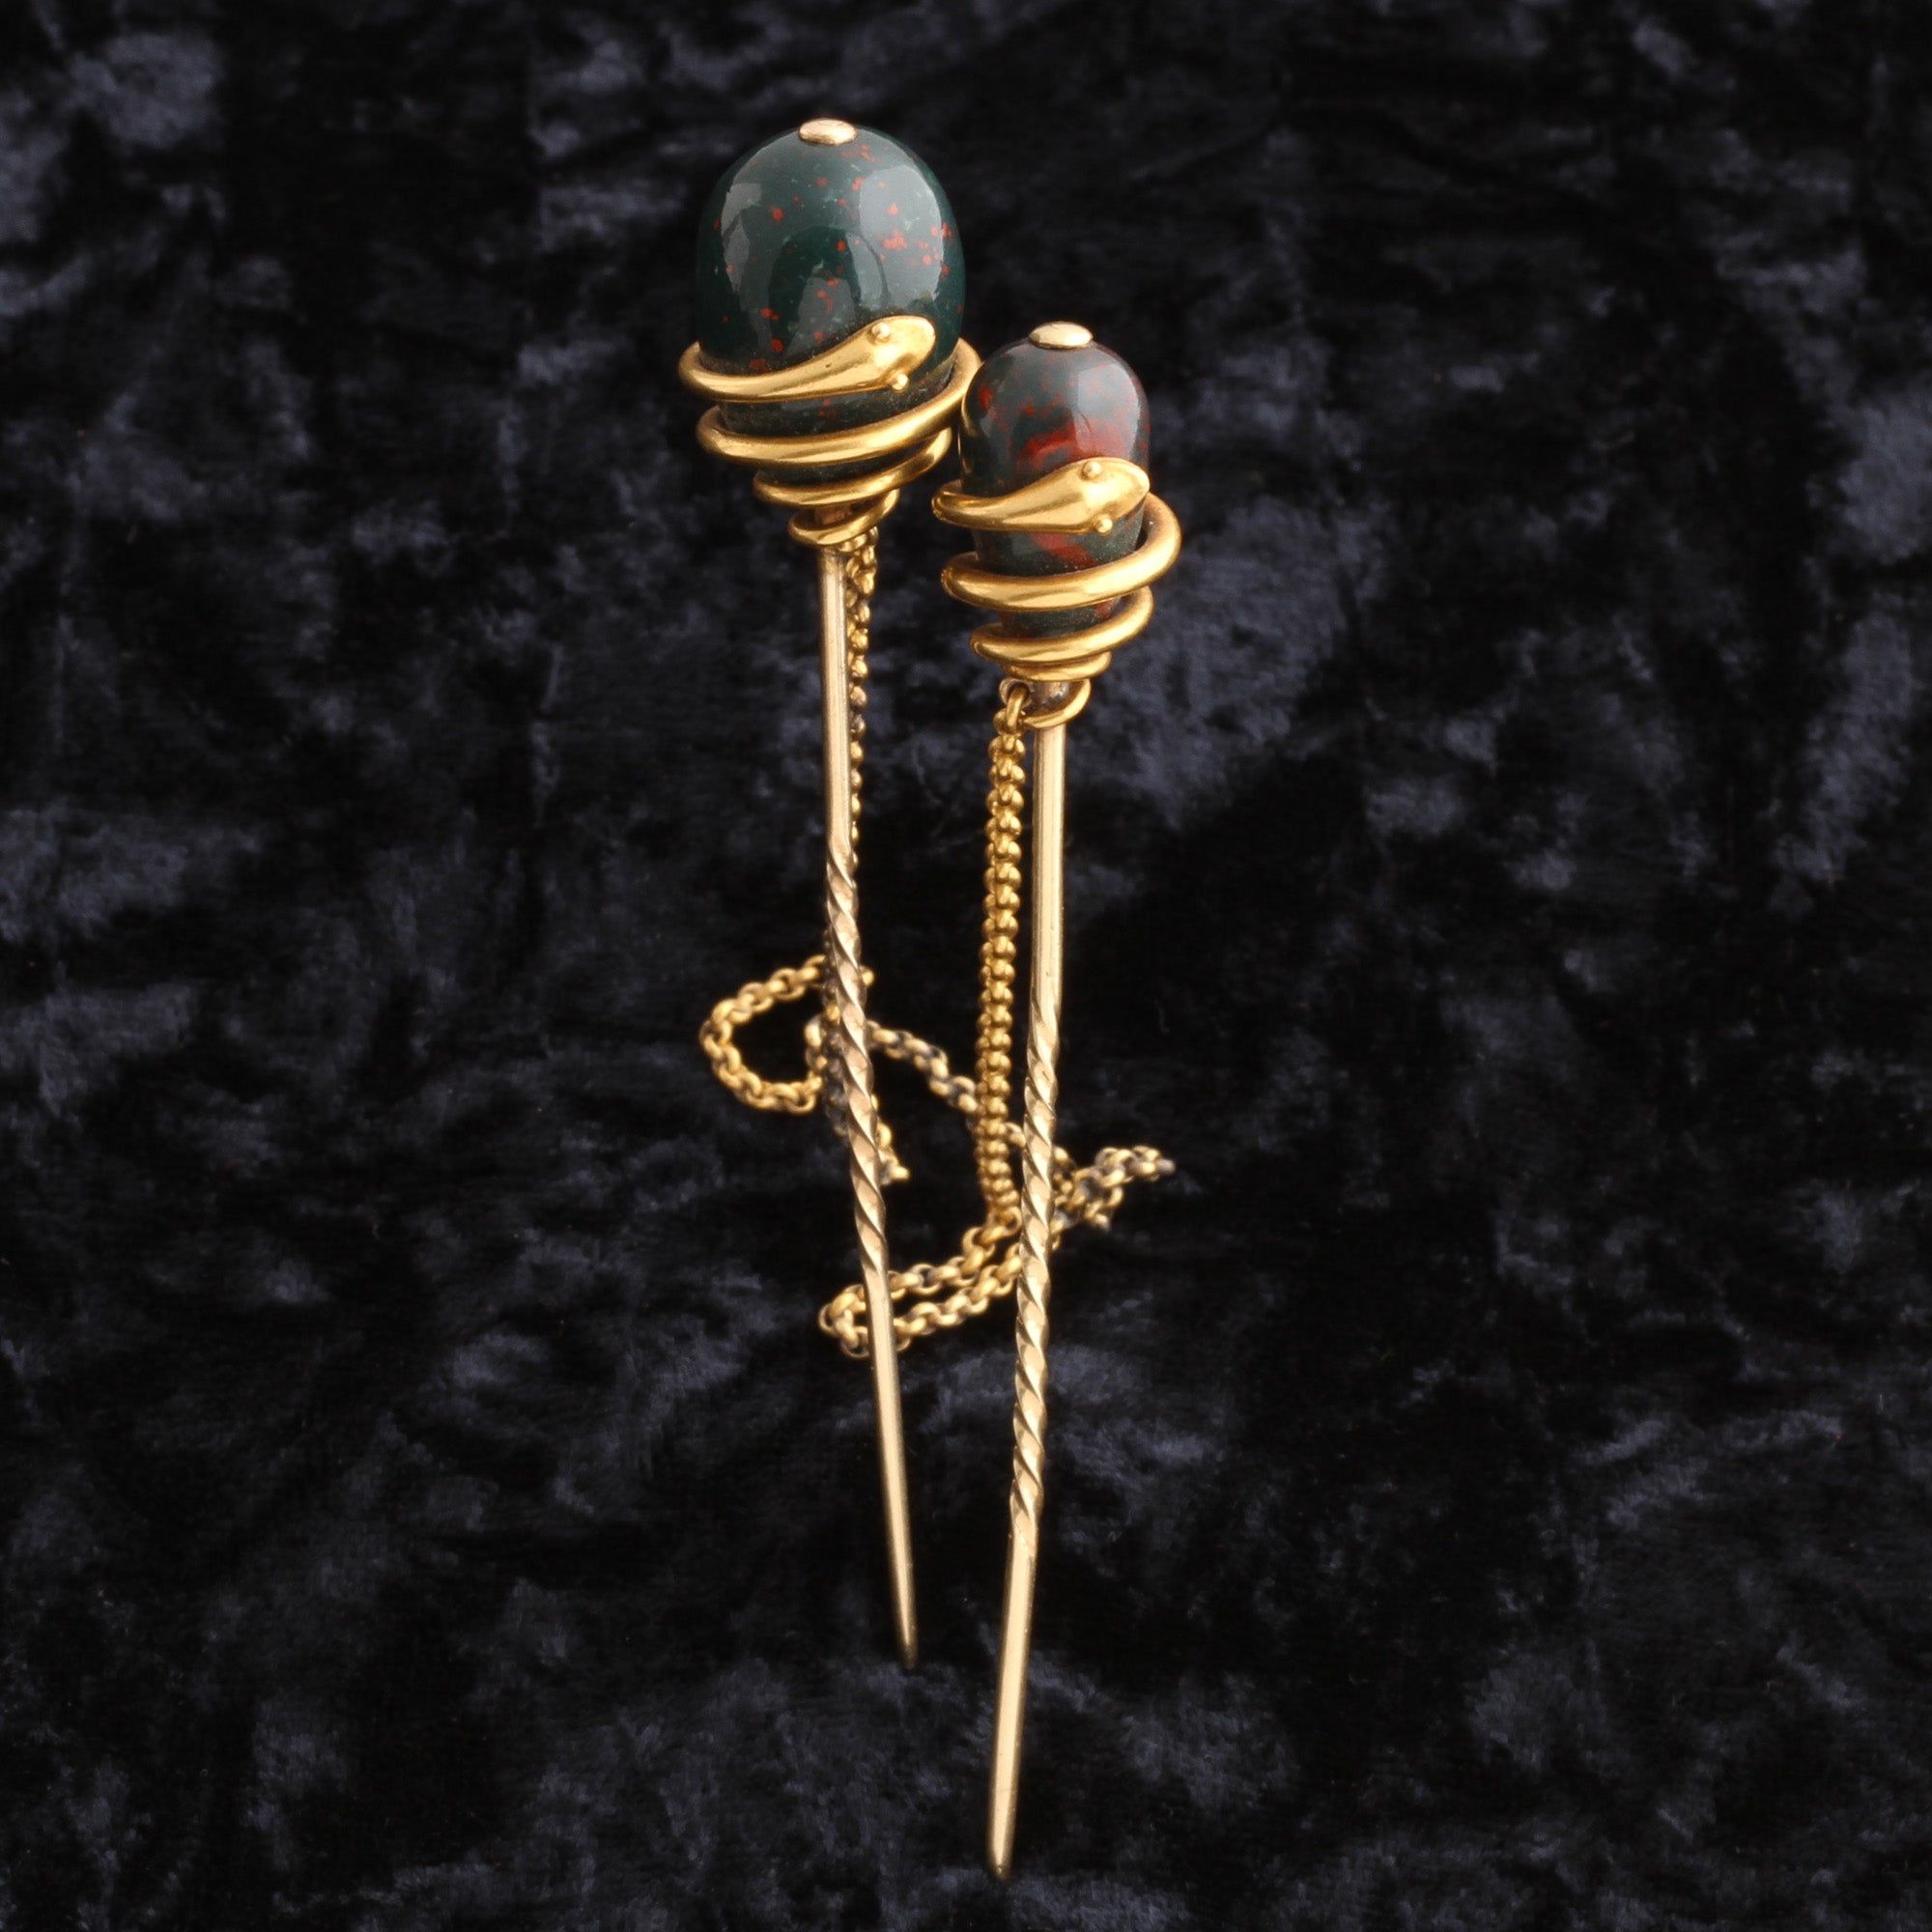 Detail of Victorian Coiled Snake & Bloodstone Cloak Pins